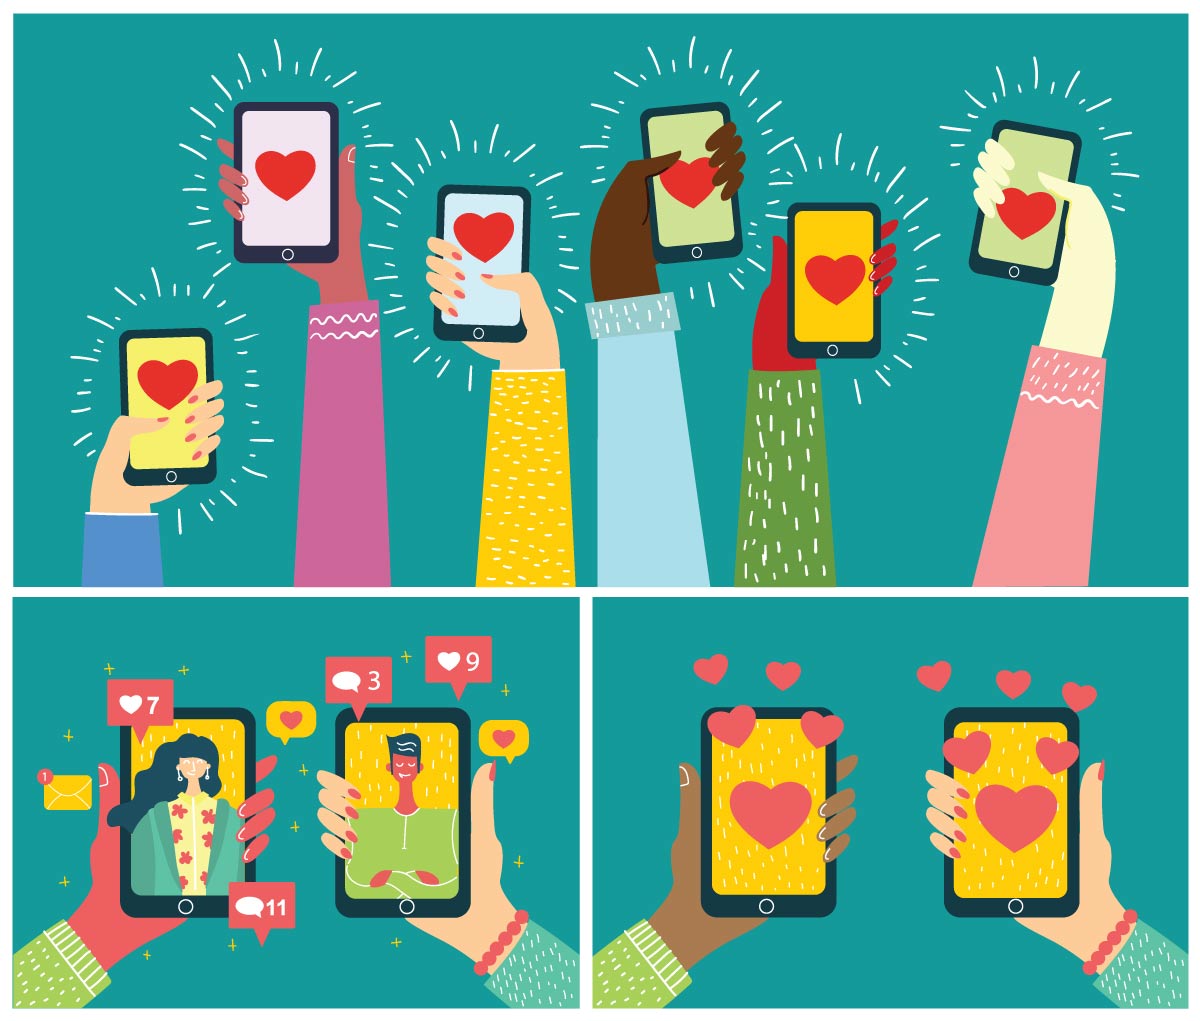 People holding their mobile phones, with hearts on the screens. Some phones have notifications and also “heart shaped” icons